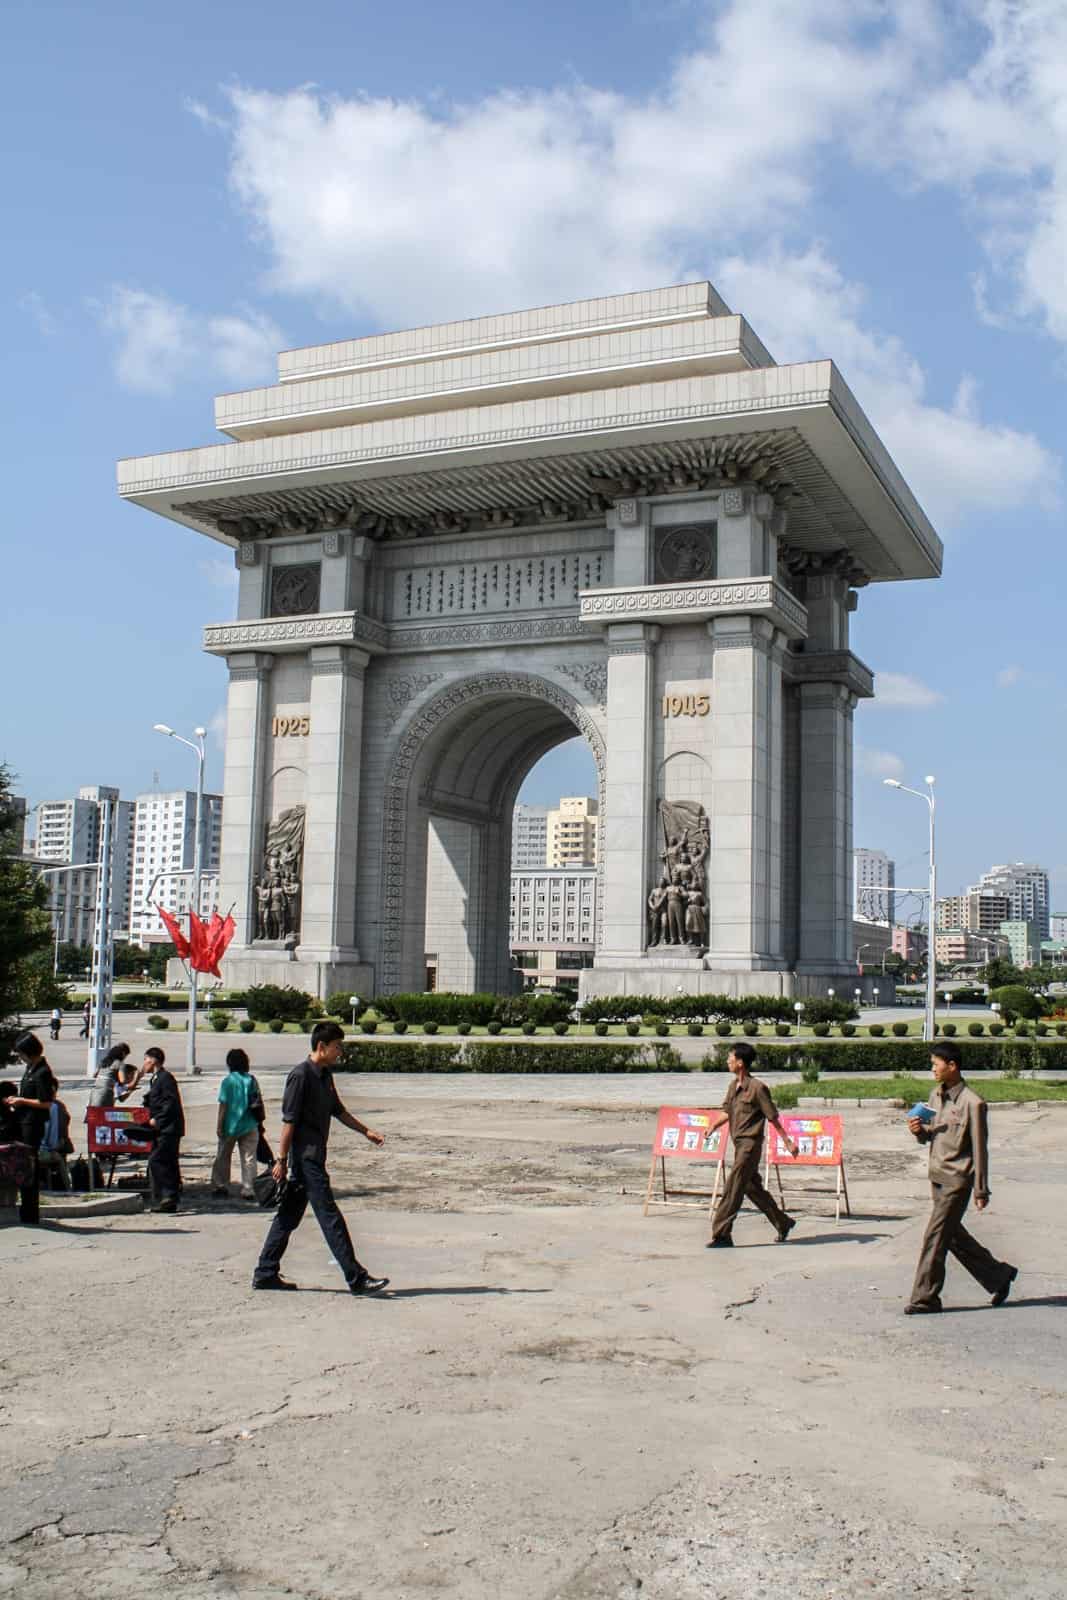 North Korea's version of the Arc de Triomphe in Pyongyang as seen on a DPRK tour